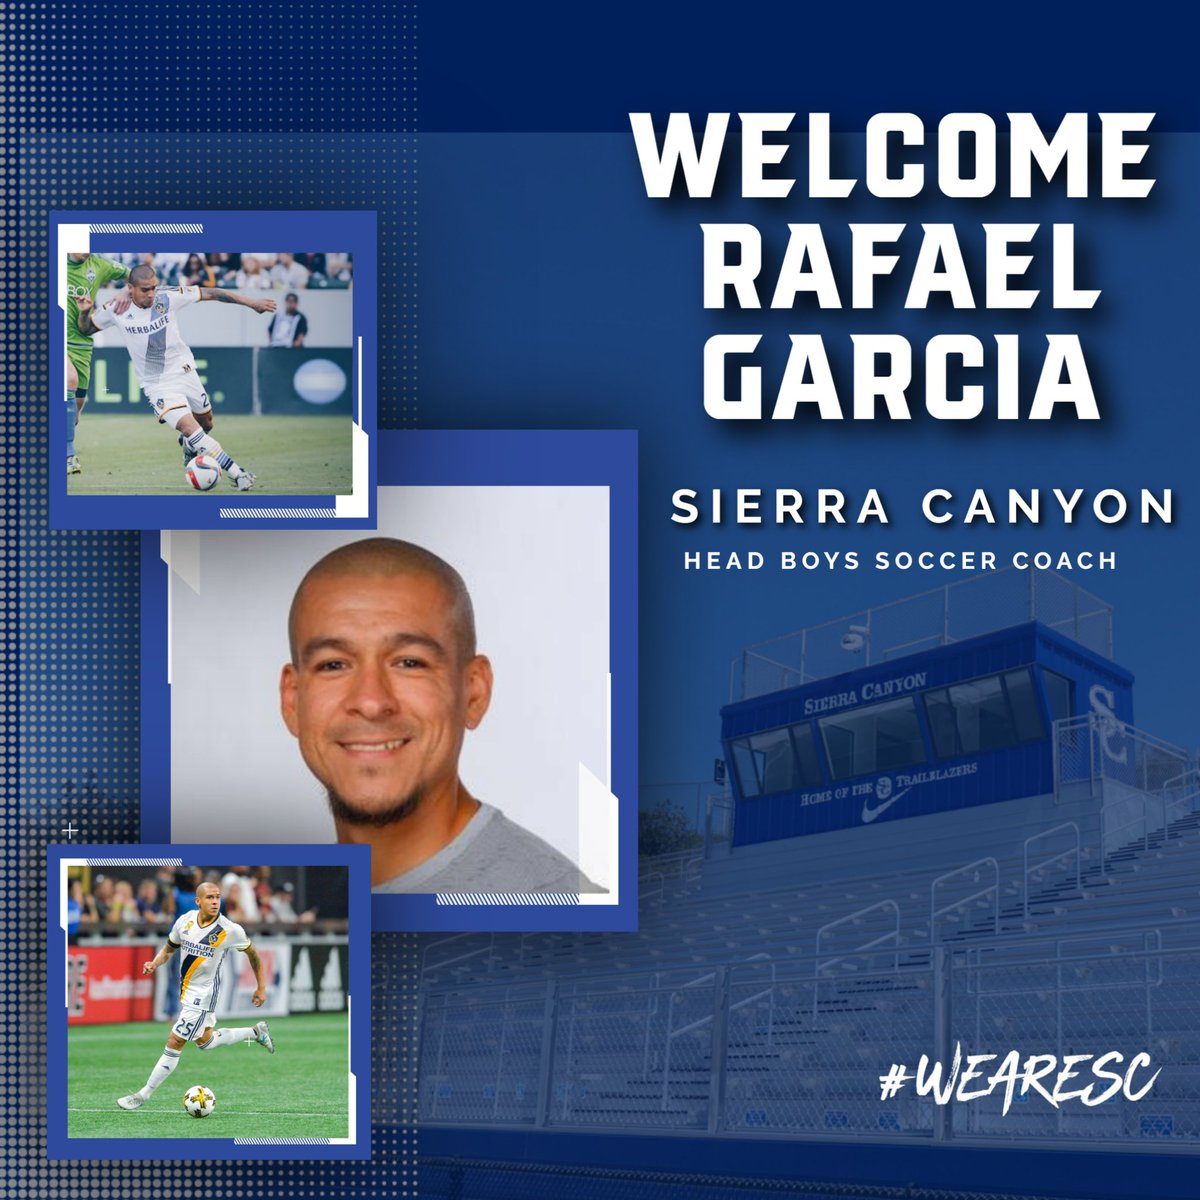 Sierra Canyon hires Rafa Garcia to be next Boys’ Soccer Coach. Garcia is an Academy Coach for the LA Galaxy and former Assistant Head Coach for CSUN’s Women’s team. Professionally he played for the LA Galaxy and the Oklahoma City Energy. @latsondheimer @Tarek_Fattal